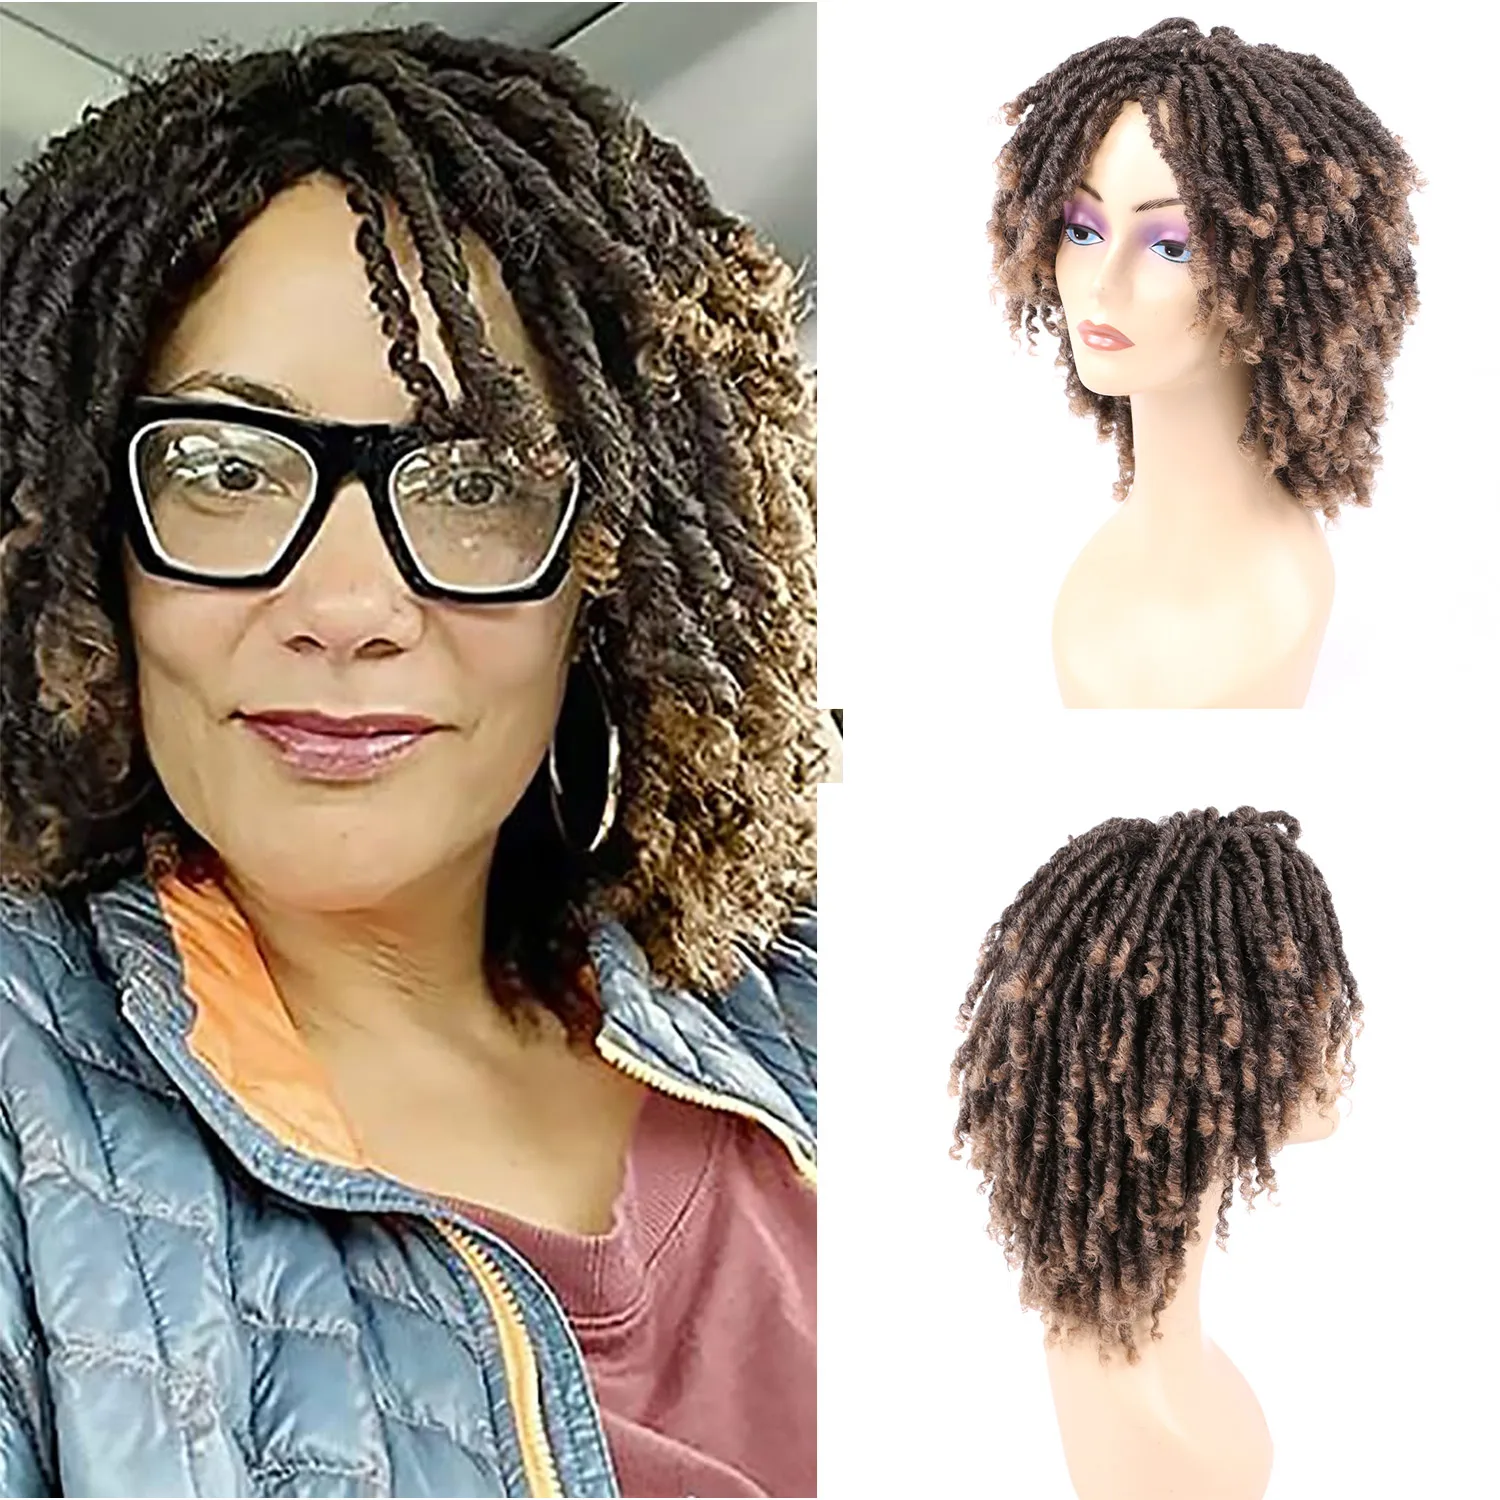 

Dreadlock Wig Short Twist Wigs for Black Women Afro Curly Braided African Hairstyle Synthetic Wigs